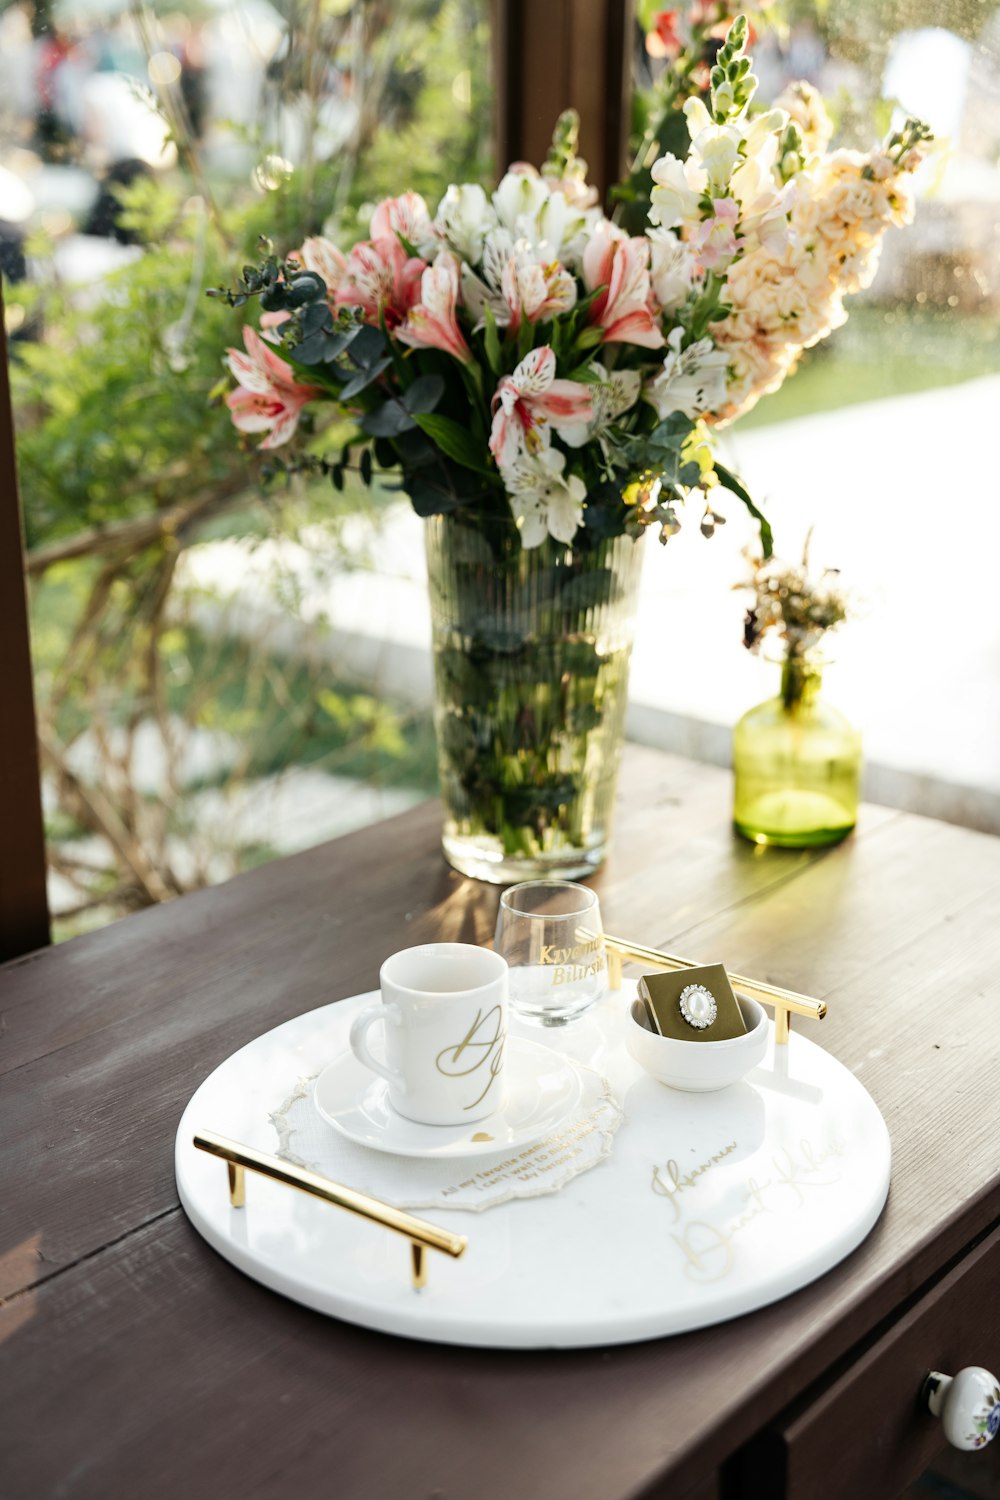 a table with a vase of flowers and two cups on it